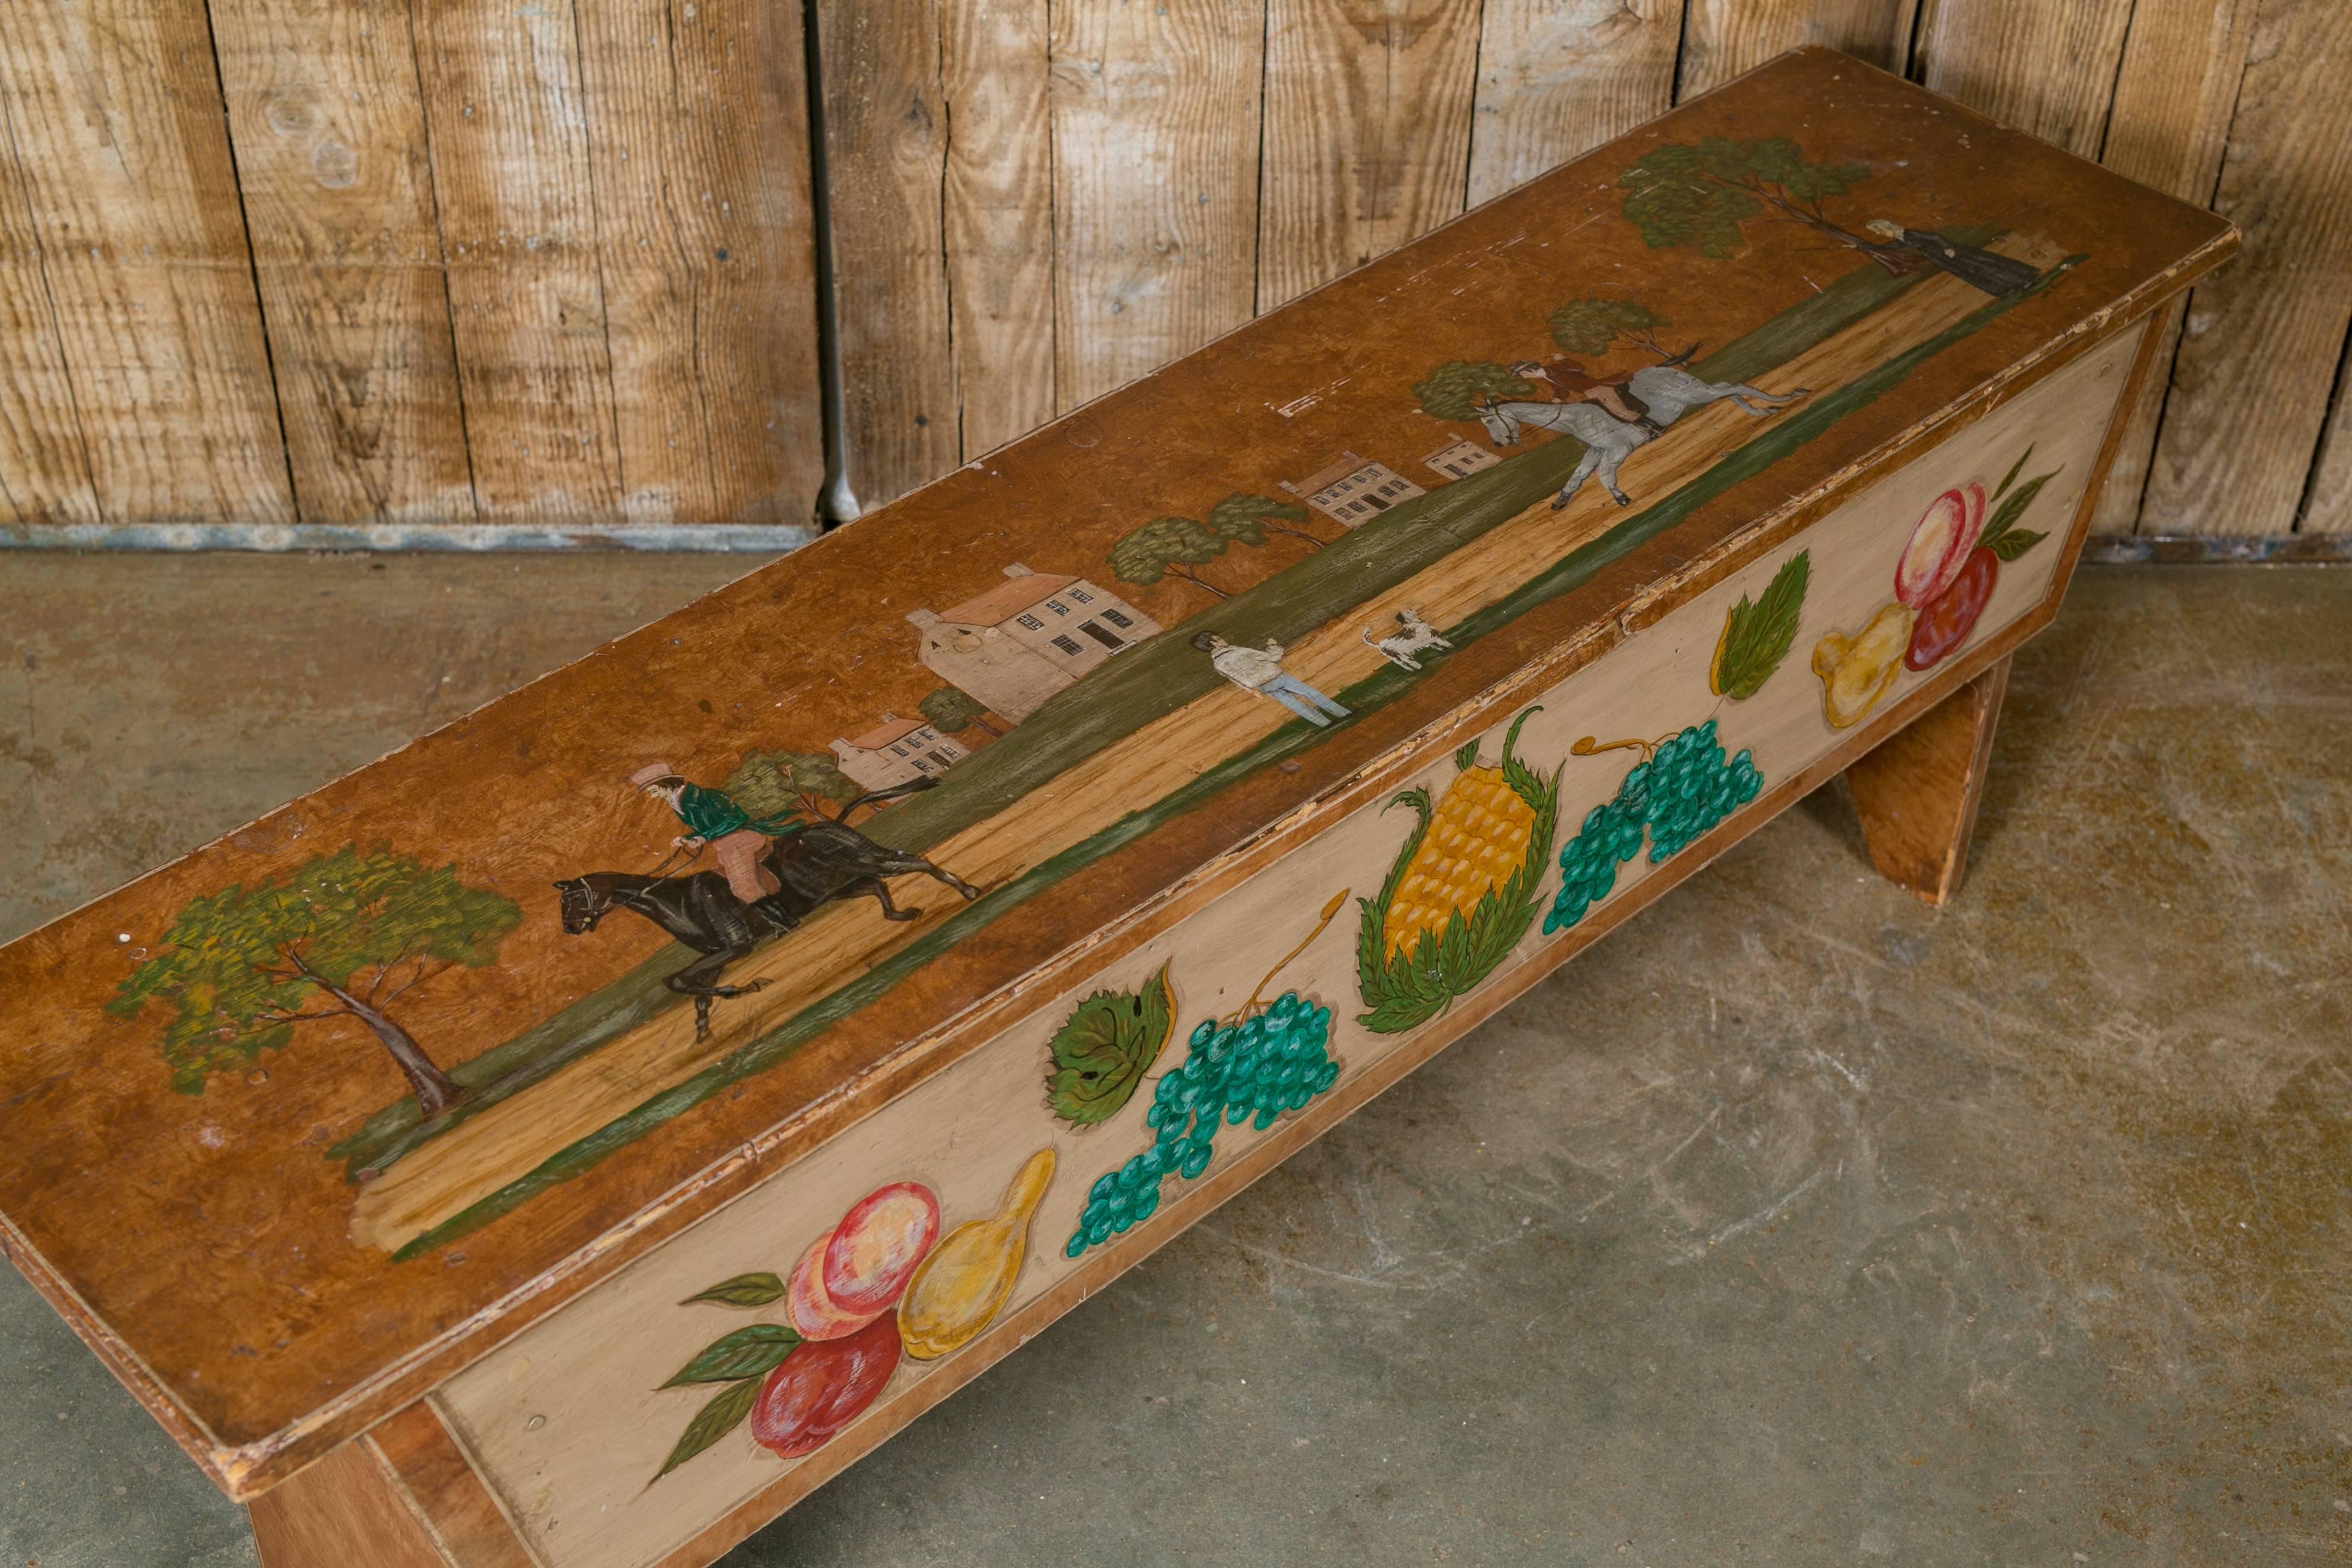 Hand-Crafted Antique Wooden Bench Hand-Painted by Artist Lew Hudnall, circa 1890